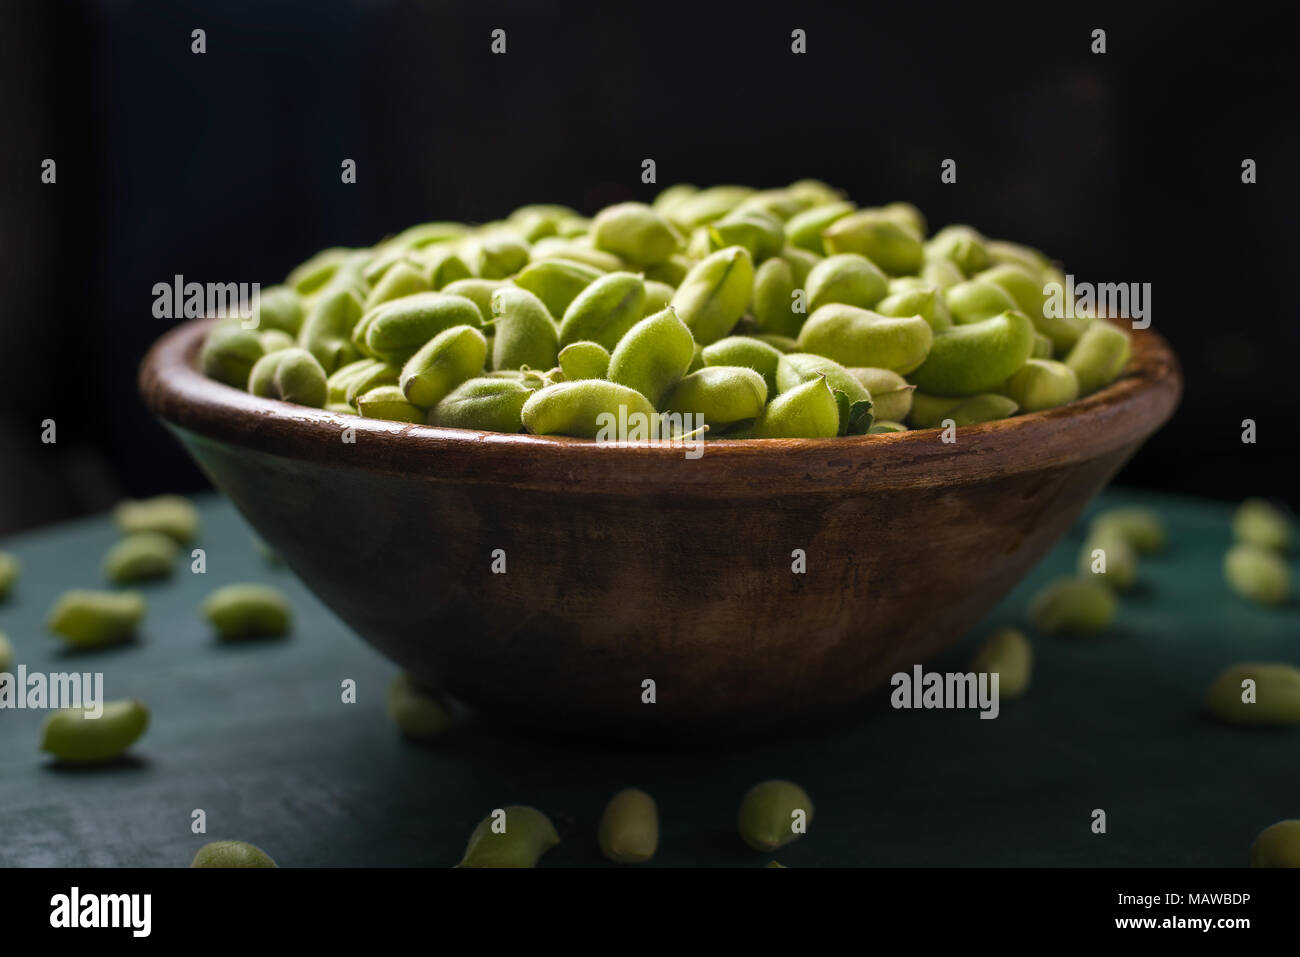 Oven Roasted Fresh Green Chickpeas snack Stock Photo